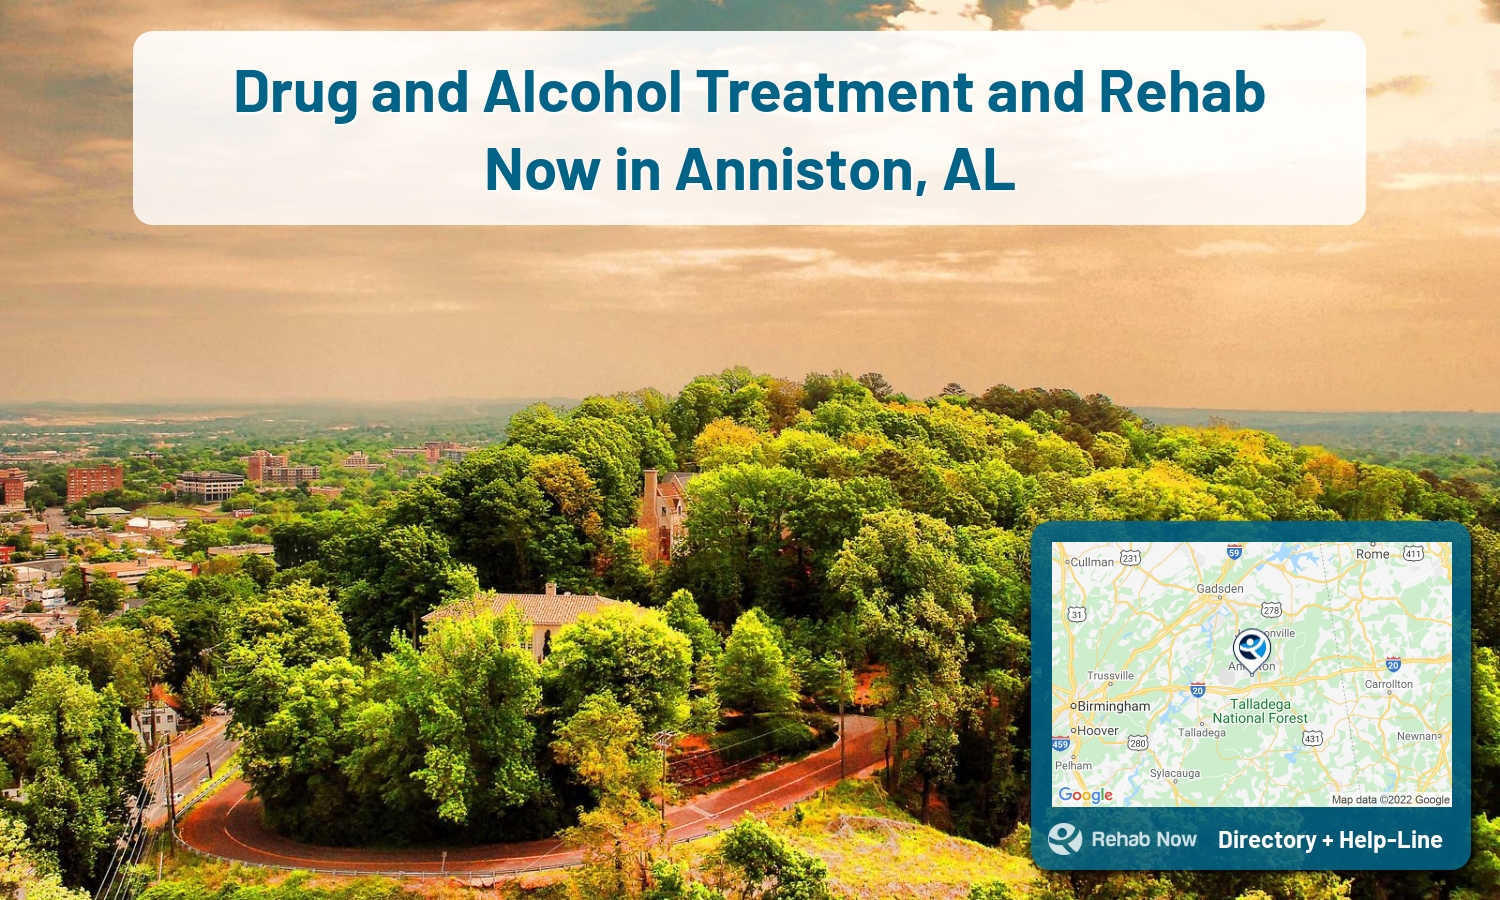 Ready to pick a rehab center in Anniston? Get off alcohol, opiates, and other drugs, by selecting top drug rehab centers in Alabama